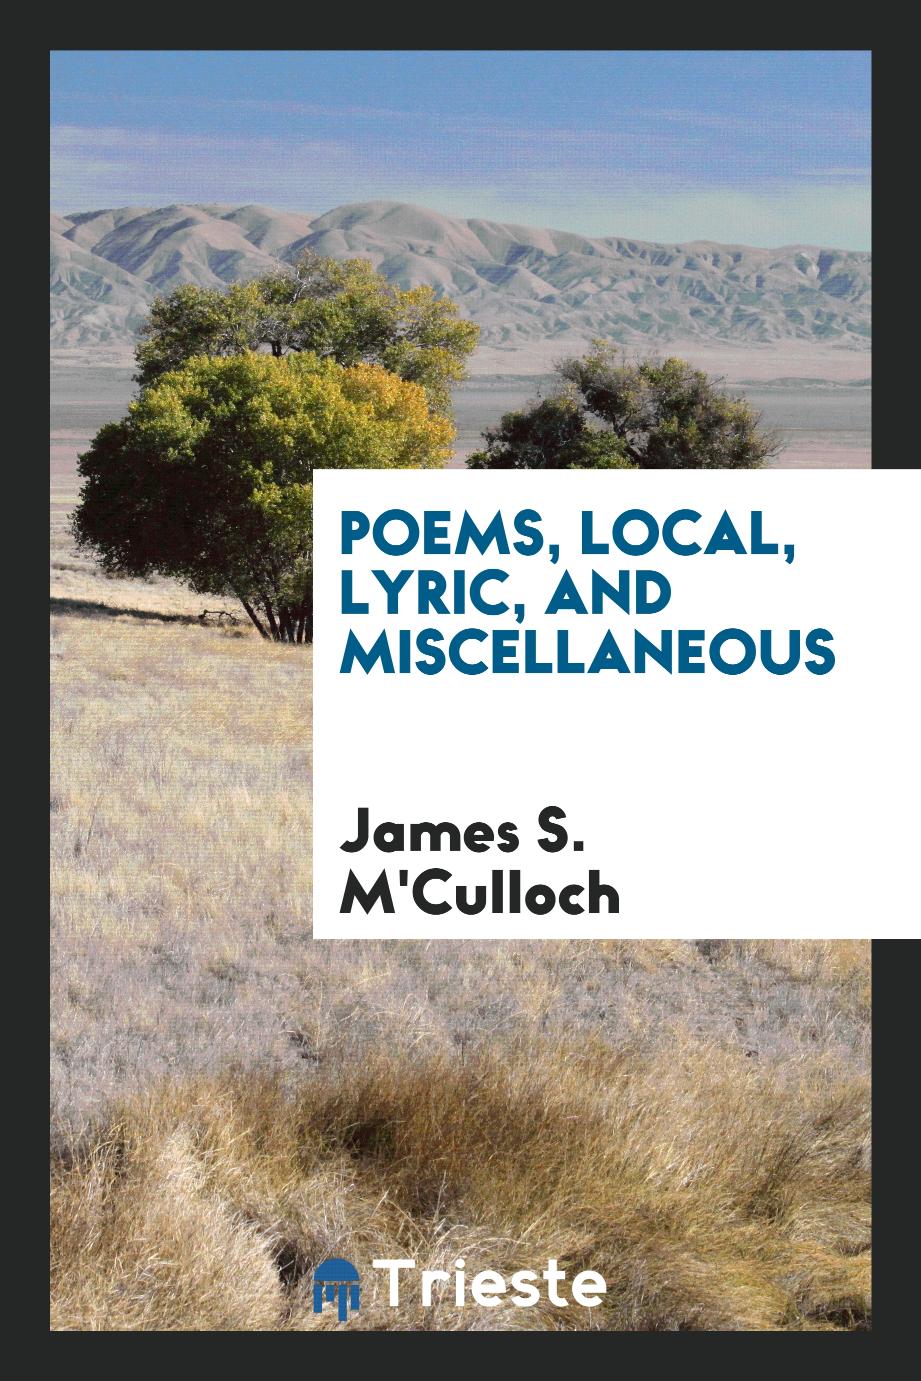 Poems, Local, Lyric, and Miscellaneous